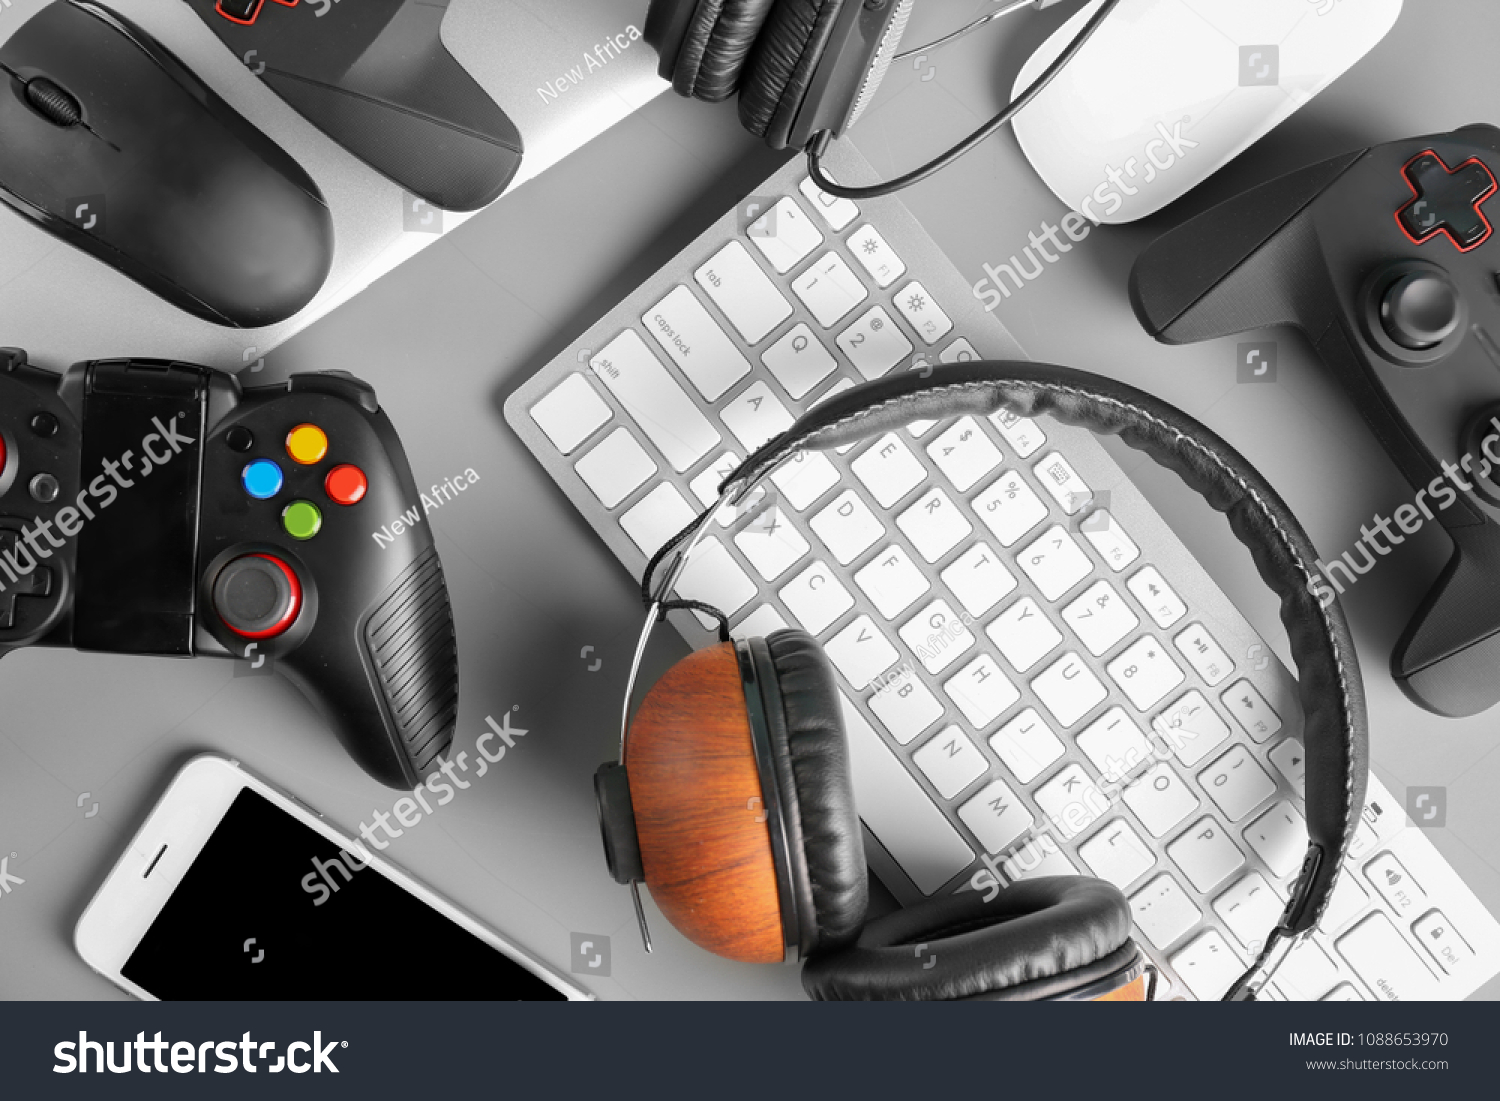 Gamepads, mice, headphones and keyboard on table #1088653970